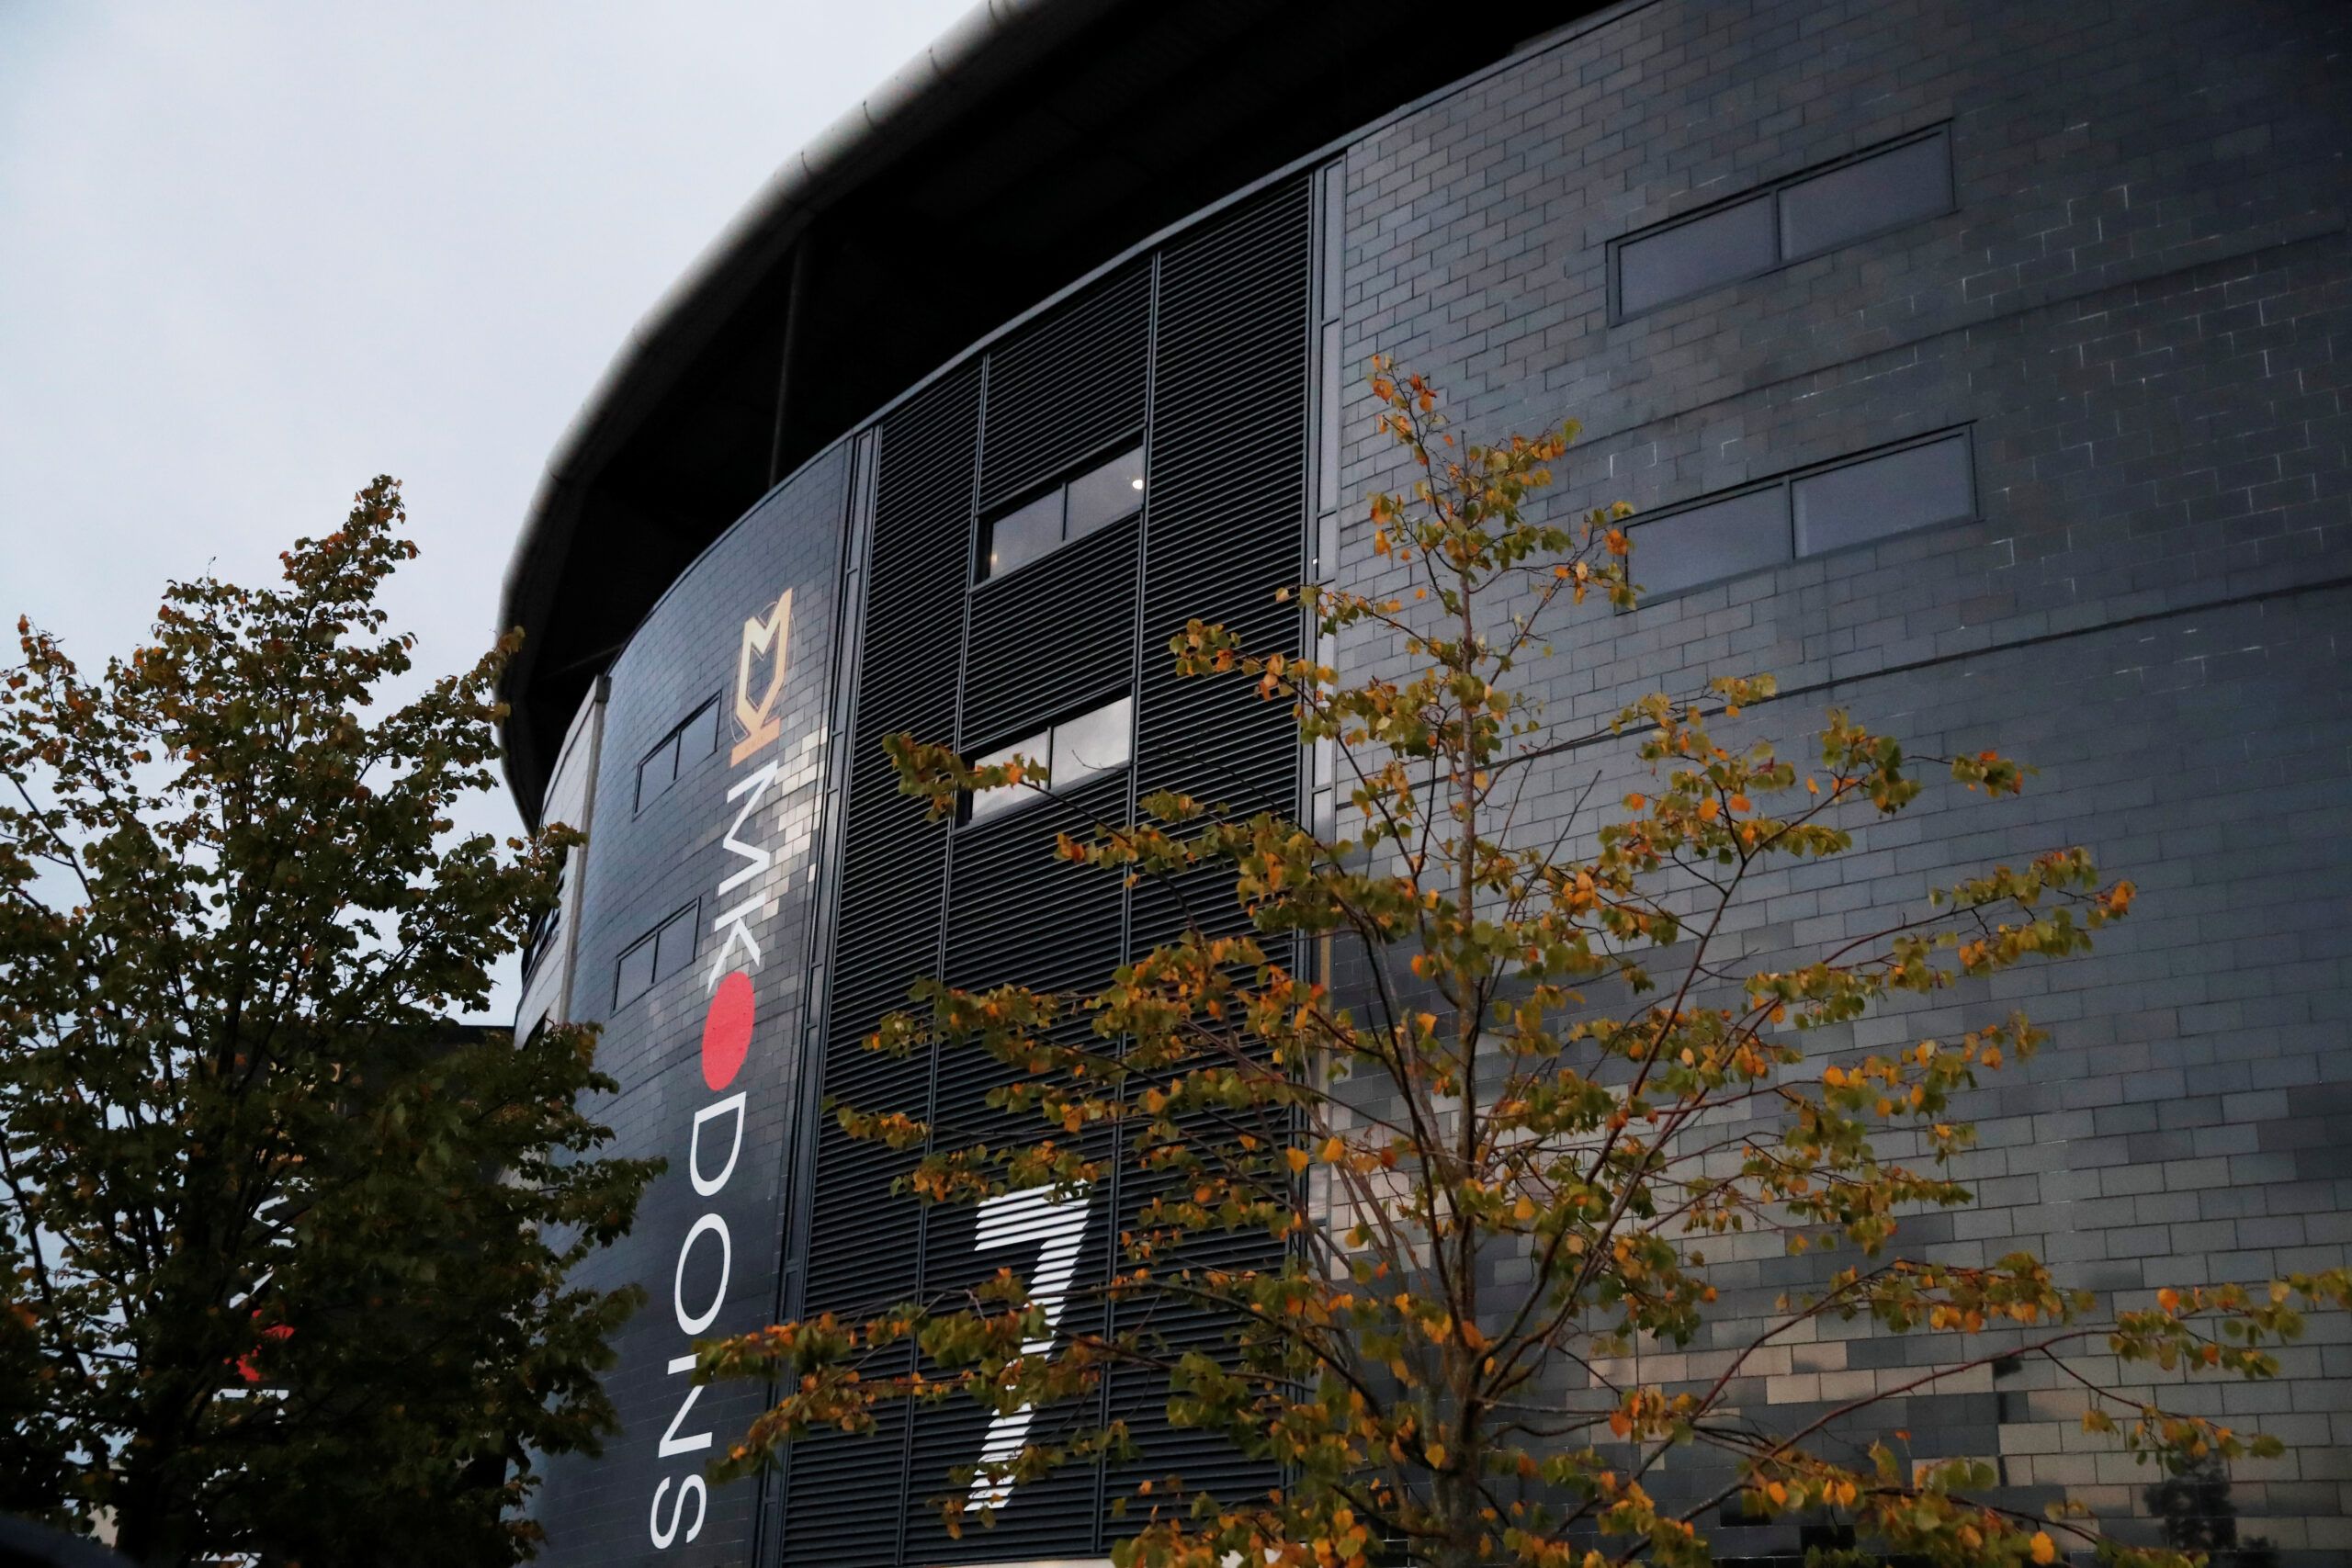 Soccer Football - Carabao Cup - Third Round - Milton Keynes Dons v Liverpool - Stadium MK, Milton Keynes, Britain - September 25, 2019  General view outside the stadium before the match   Action Images via Reuters/Andrew Boyers  EDITORIAL USE ONLY. No use with unauthorized audio, video, data, fixture lists, club/league logos or 